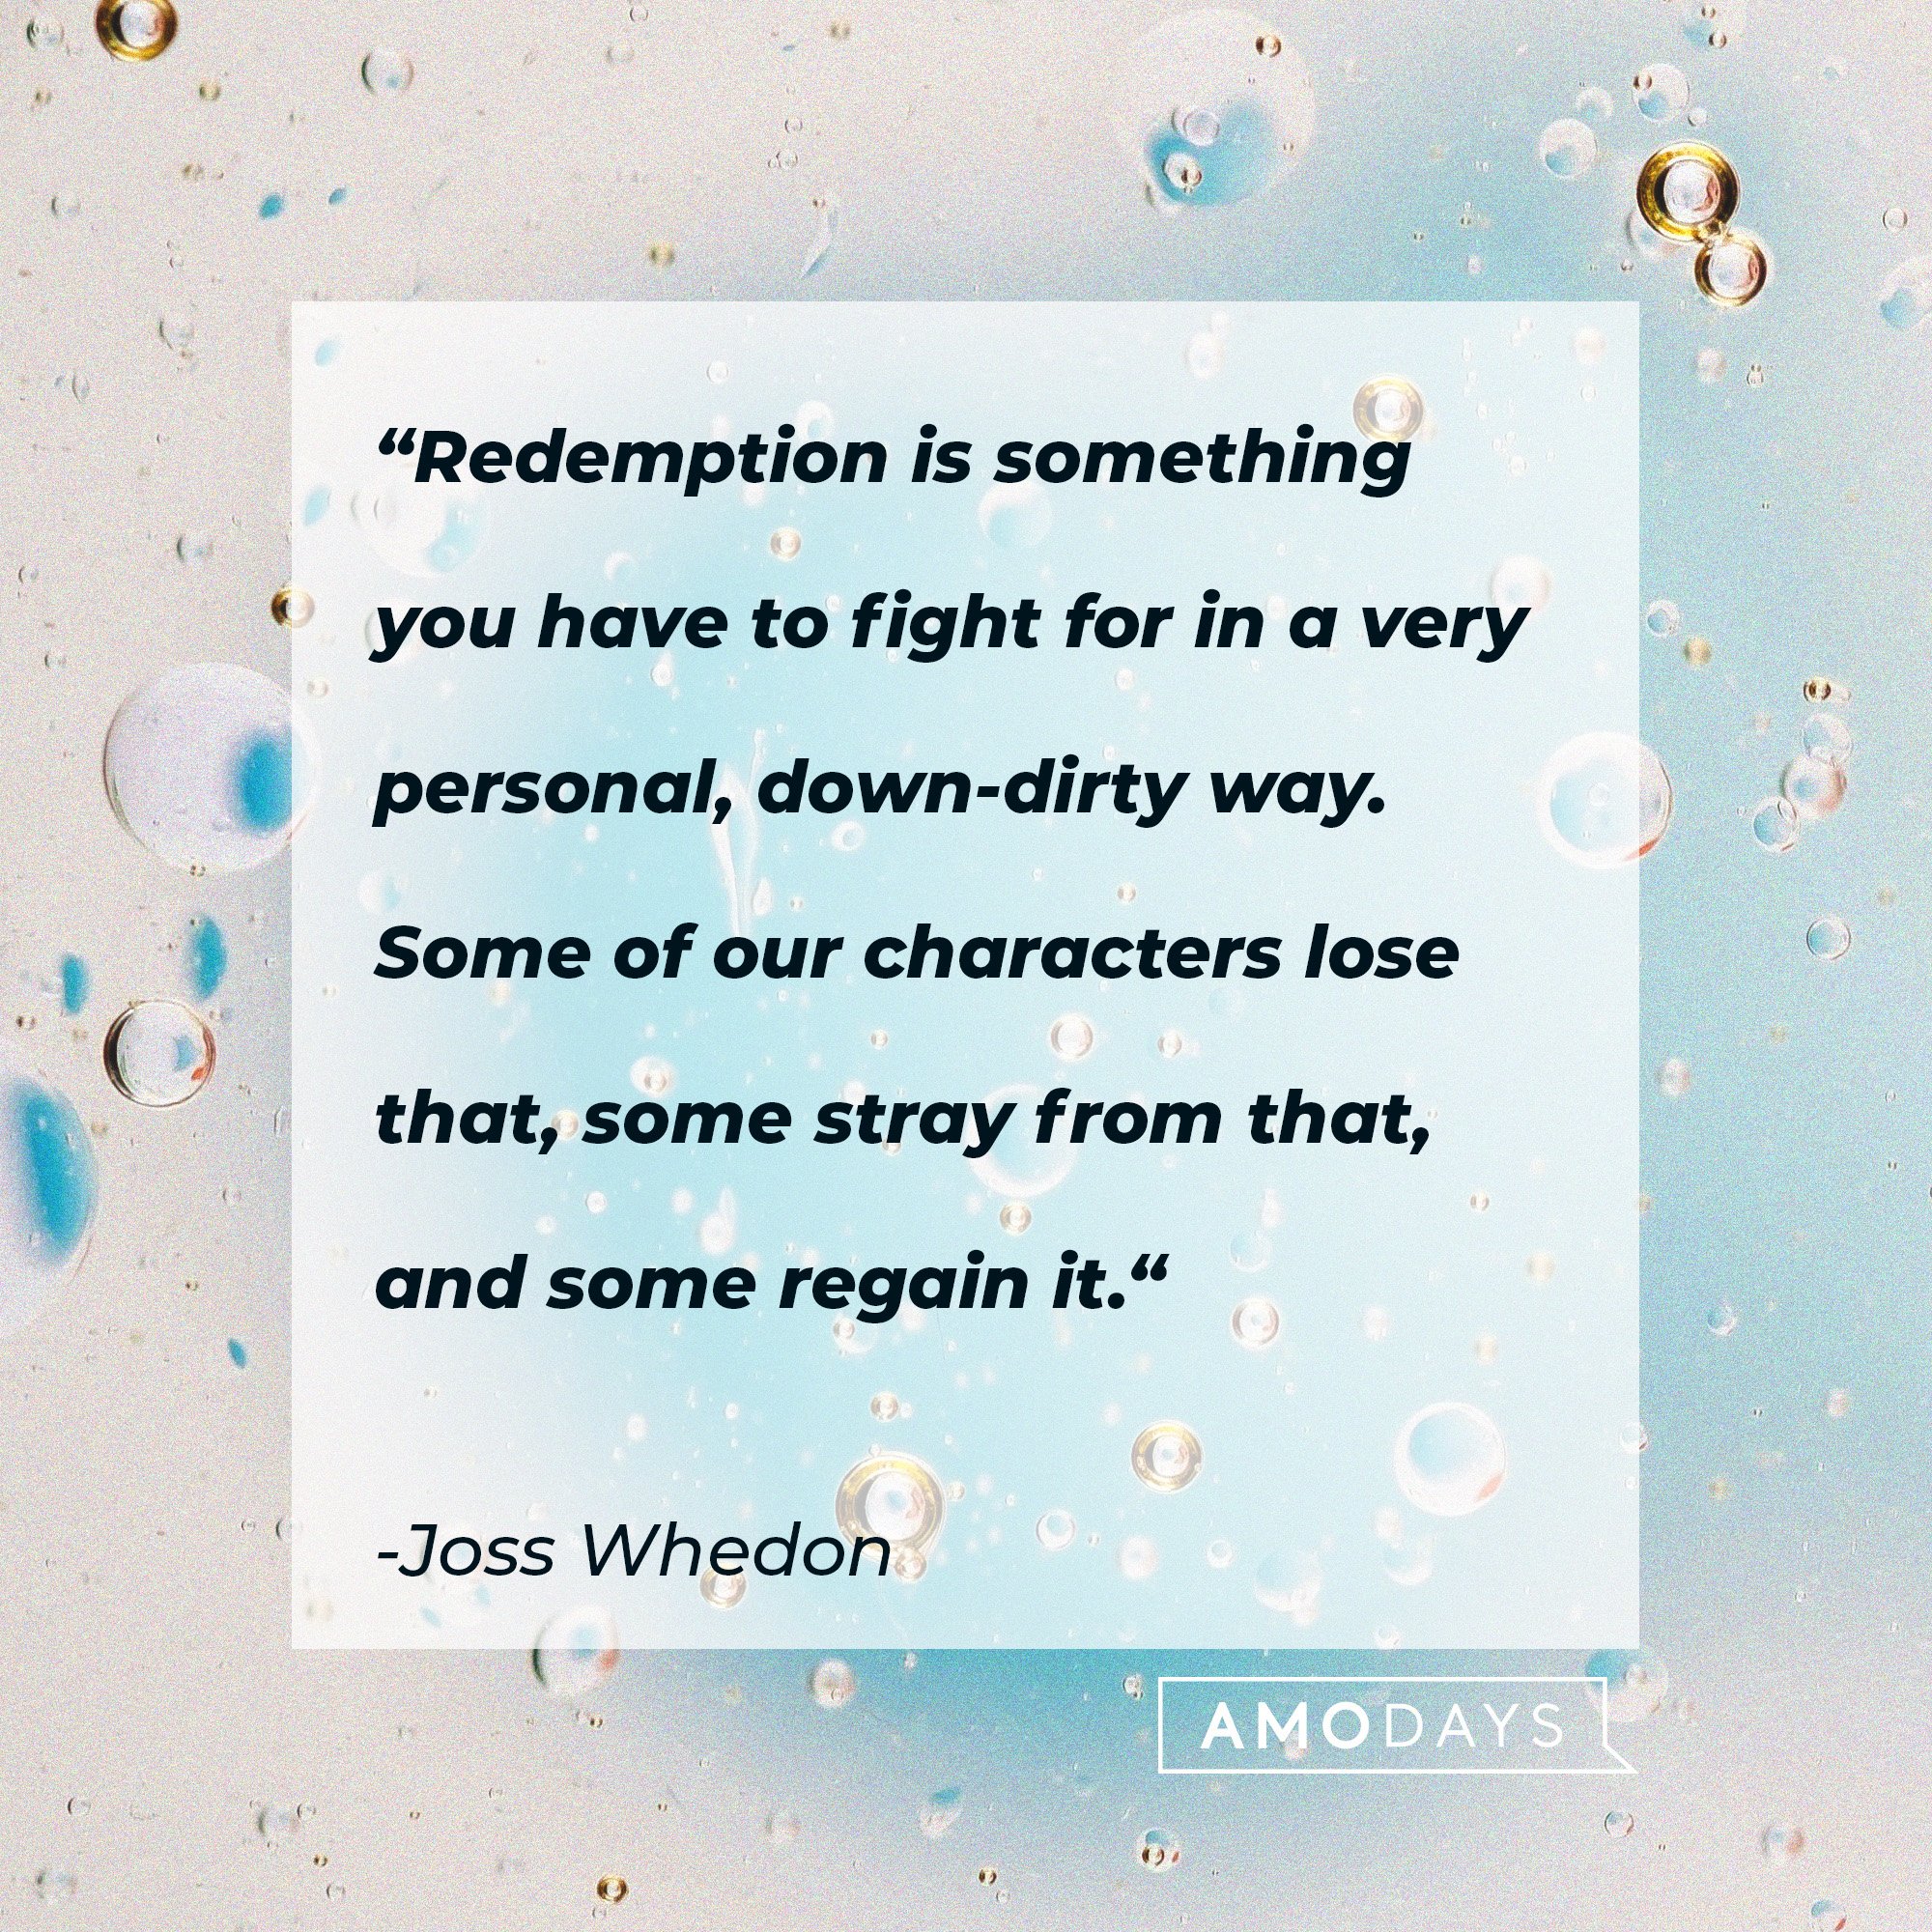 Joss Whedon's quote: “Redemption is something you have to fight for in a very personal, down-dirty way. Some of our characters lose that, some stray from that, and some regain it.“ | Image: AmoDays